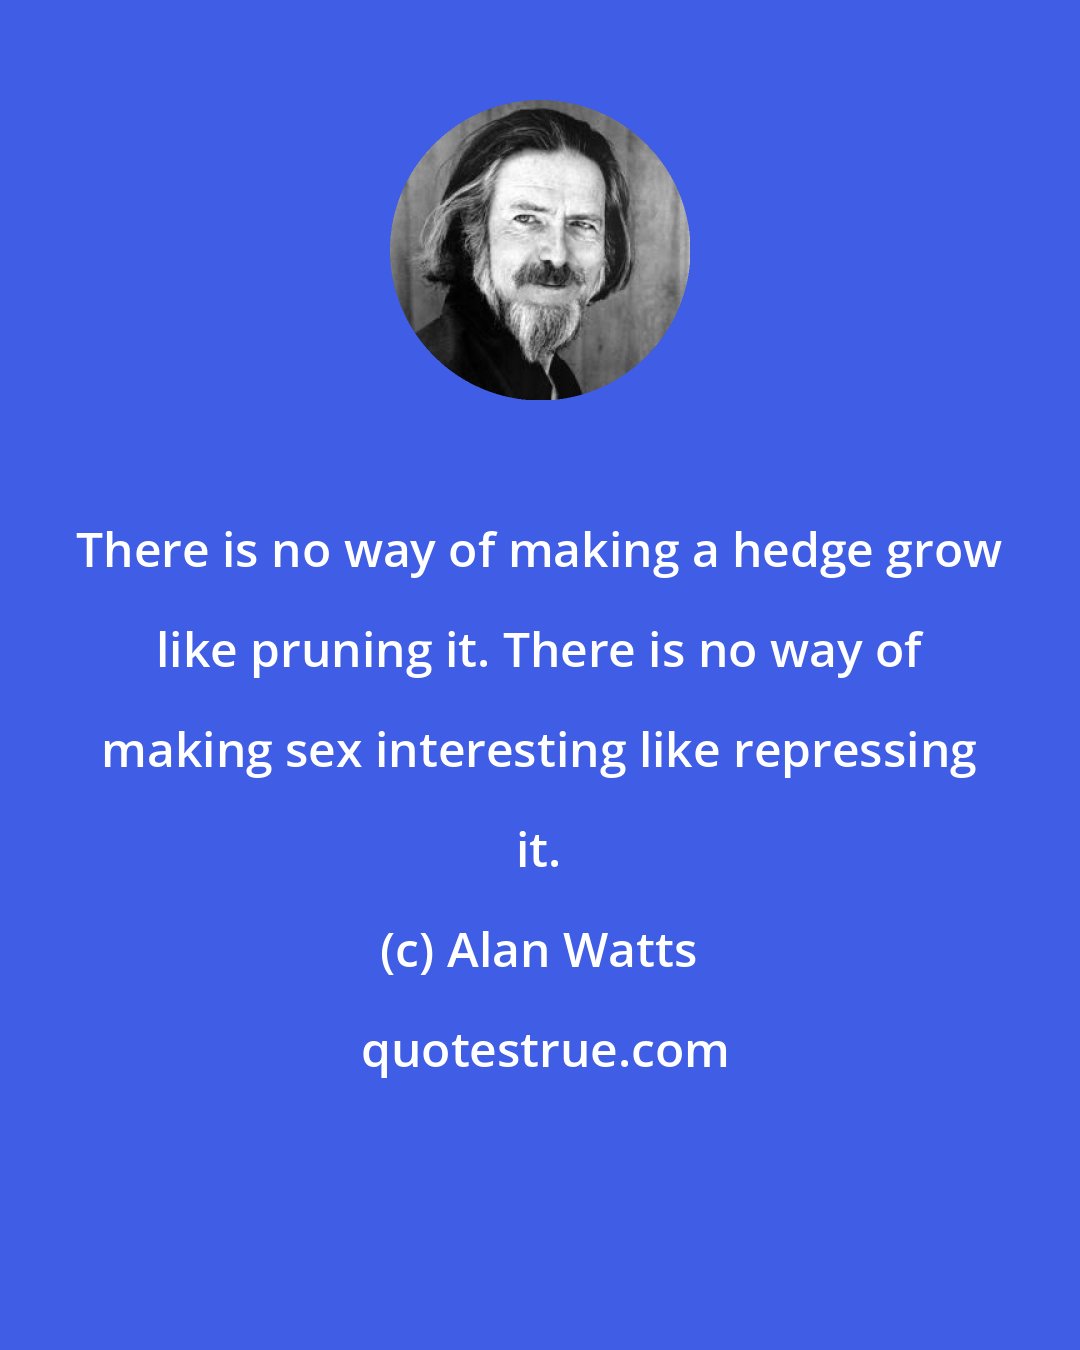 Alan Watts: There is no way of making a hedge grow like pruning it. There is no way of making sex interesting like repressing it.